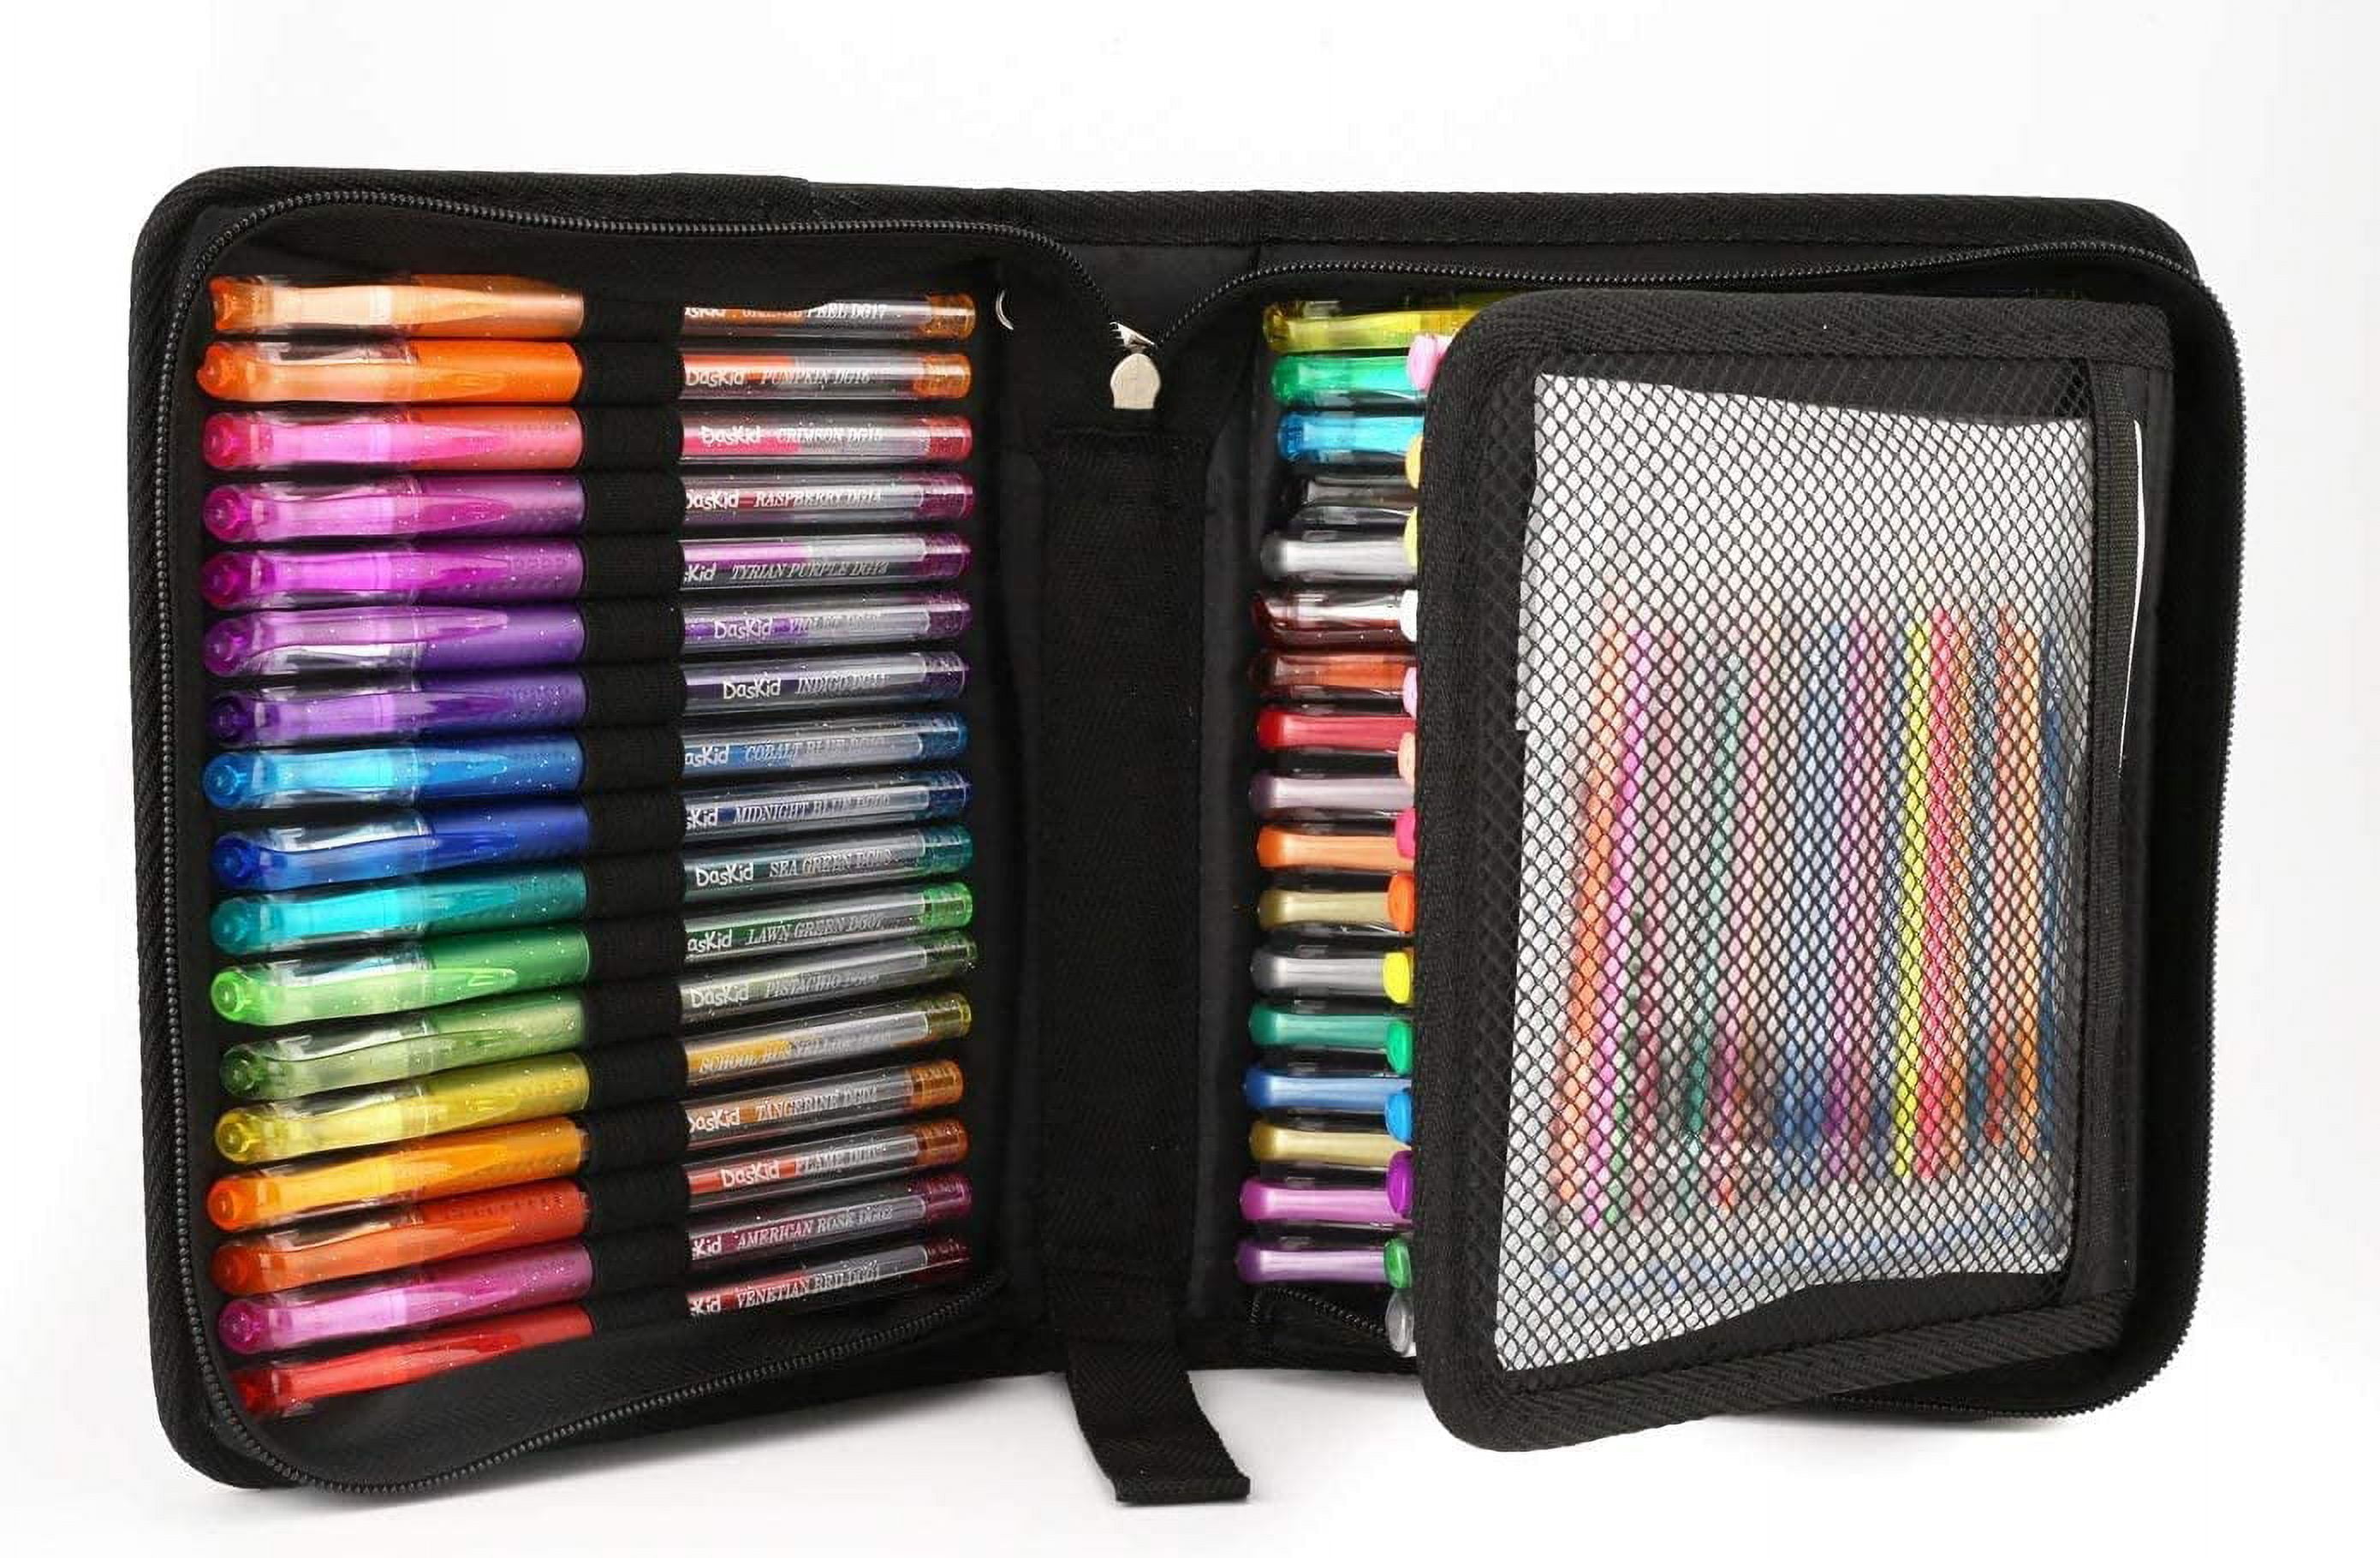 ZSCM QUALITY DECIDES THE FUTURE Glitter Gel Pens ZSCM 48 Pack Colored Gel  Pens Set Include 24 Colors Gel Marker Pen, 24 Refills, Glitter Pens with  40%